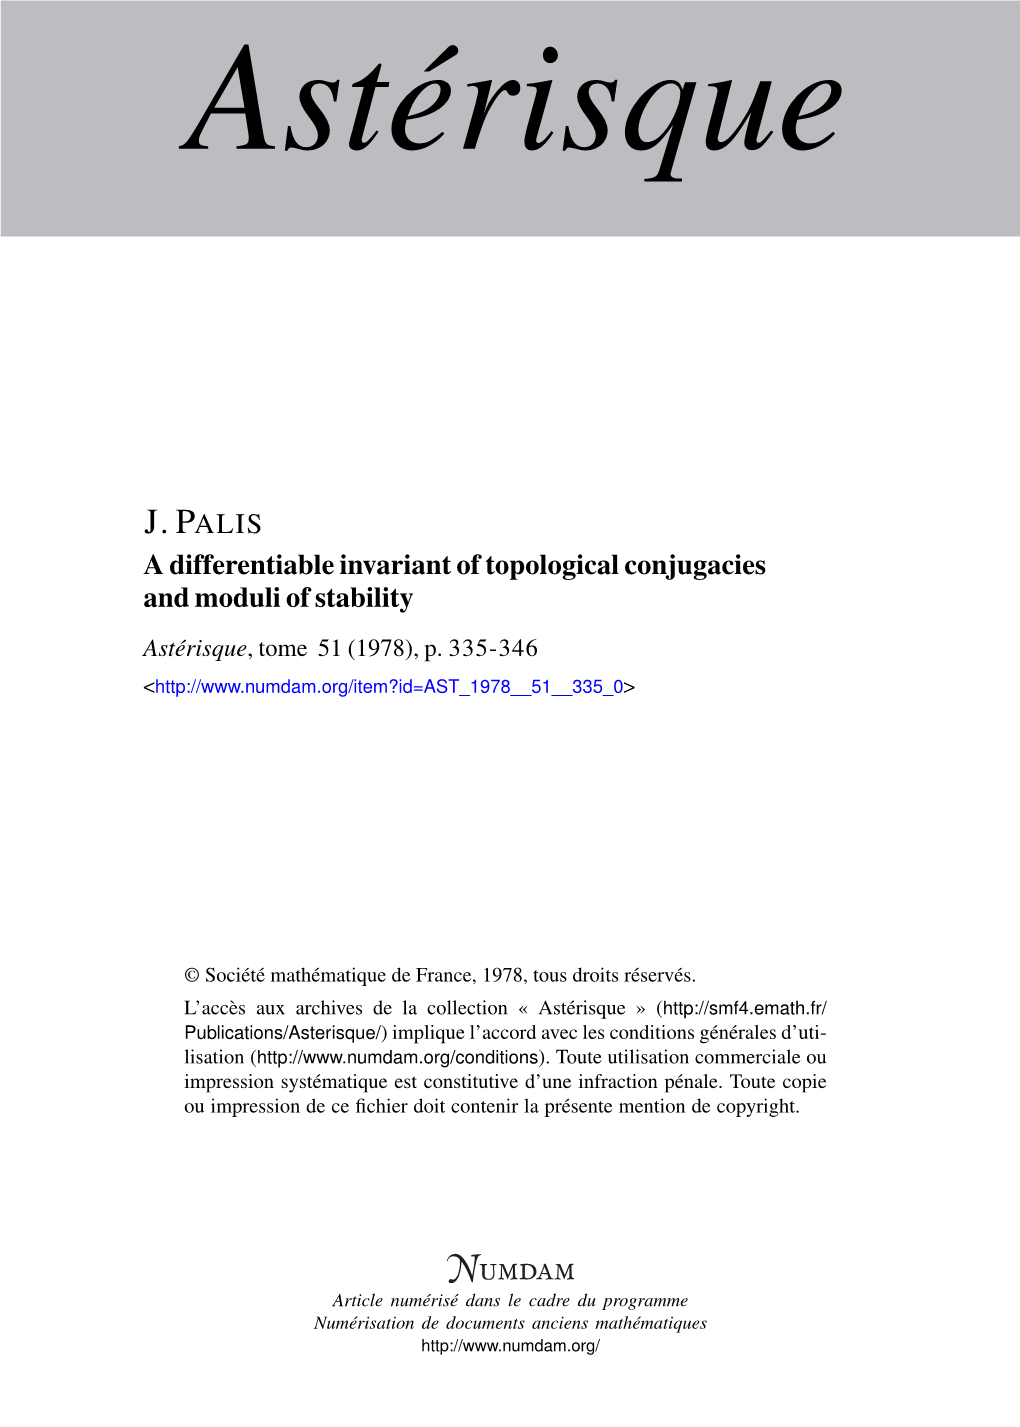 A Differentiable Invariant of Topological Conjugacies and Moduli of Stability Astérisque, Tome 51 (1978), P